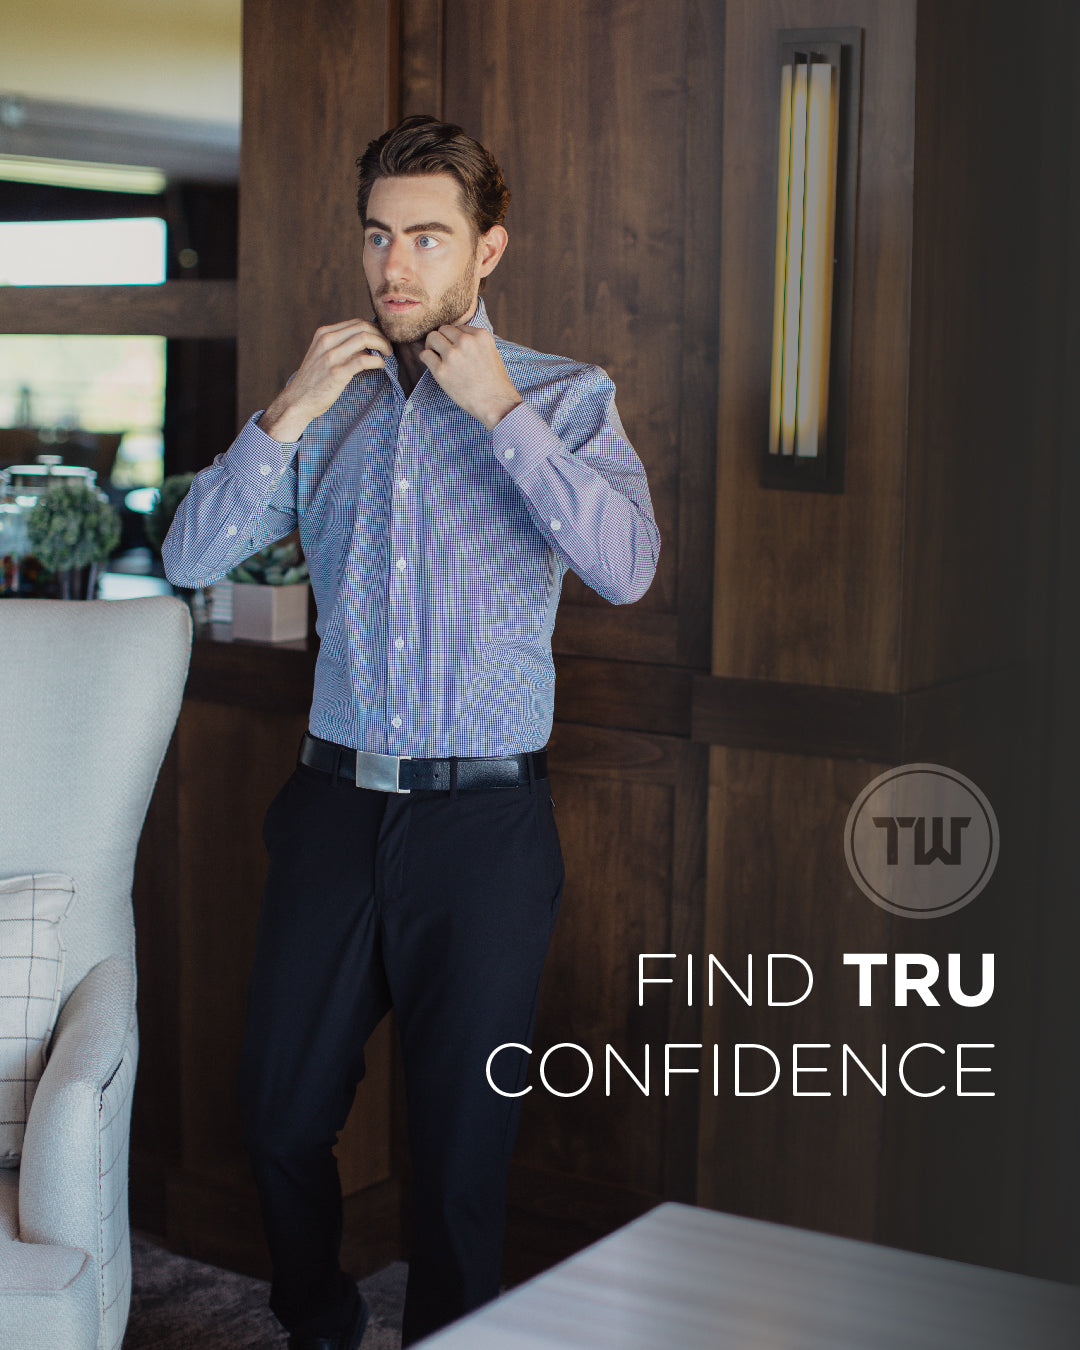 Man putting on blue dress shirt. Text on photo says ,"find tru confidence"